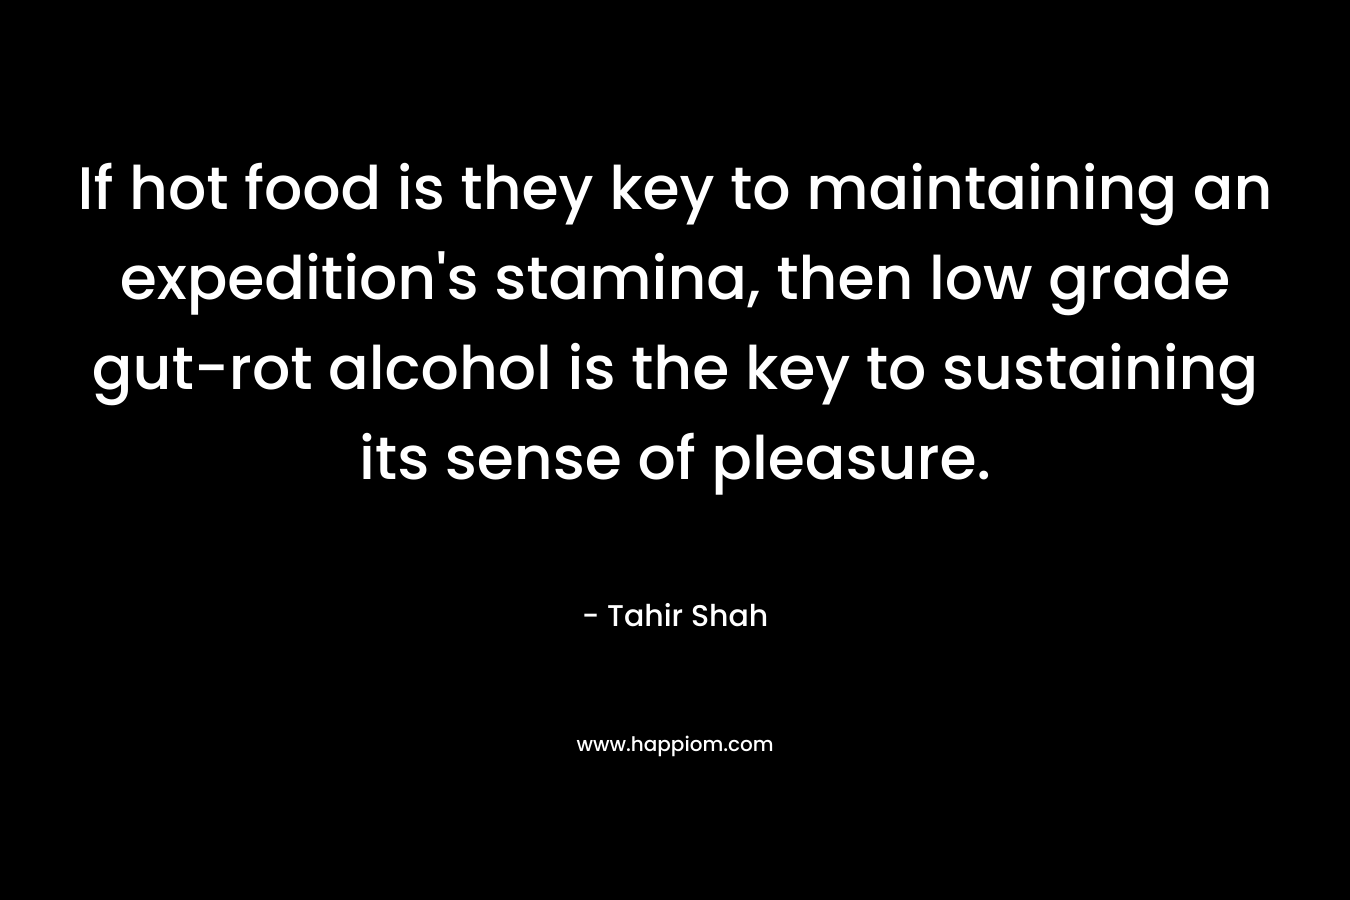 If hot food is they key to maintaining an expedition’s stamina, then low grade gut-rot alcohol is the key to sustaining its sense of pleasure. – Tahir Shah